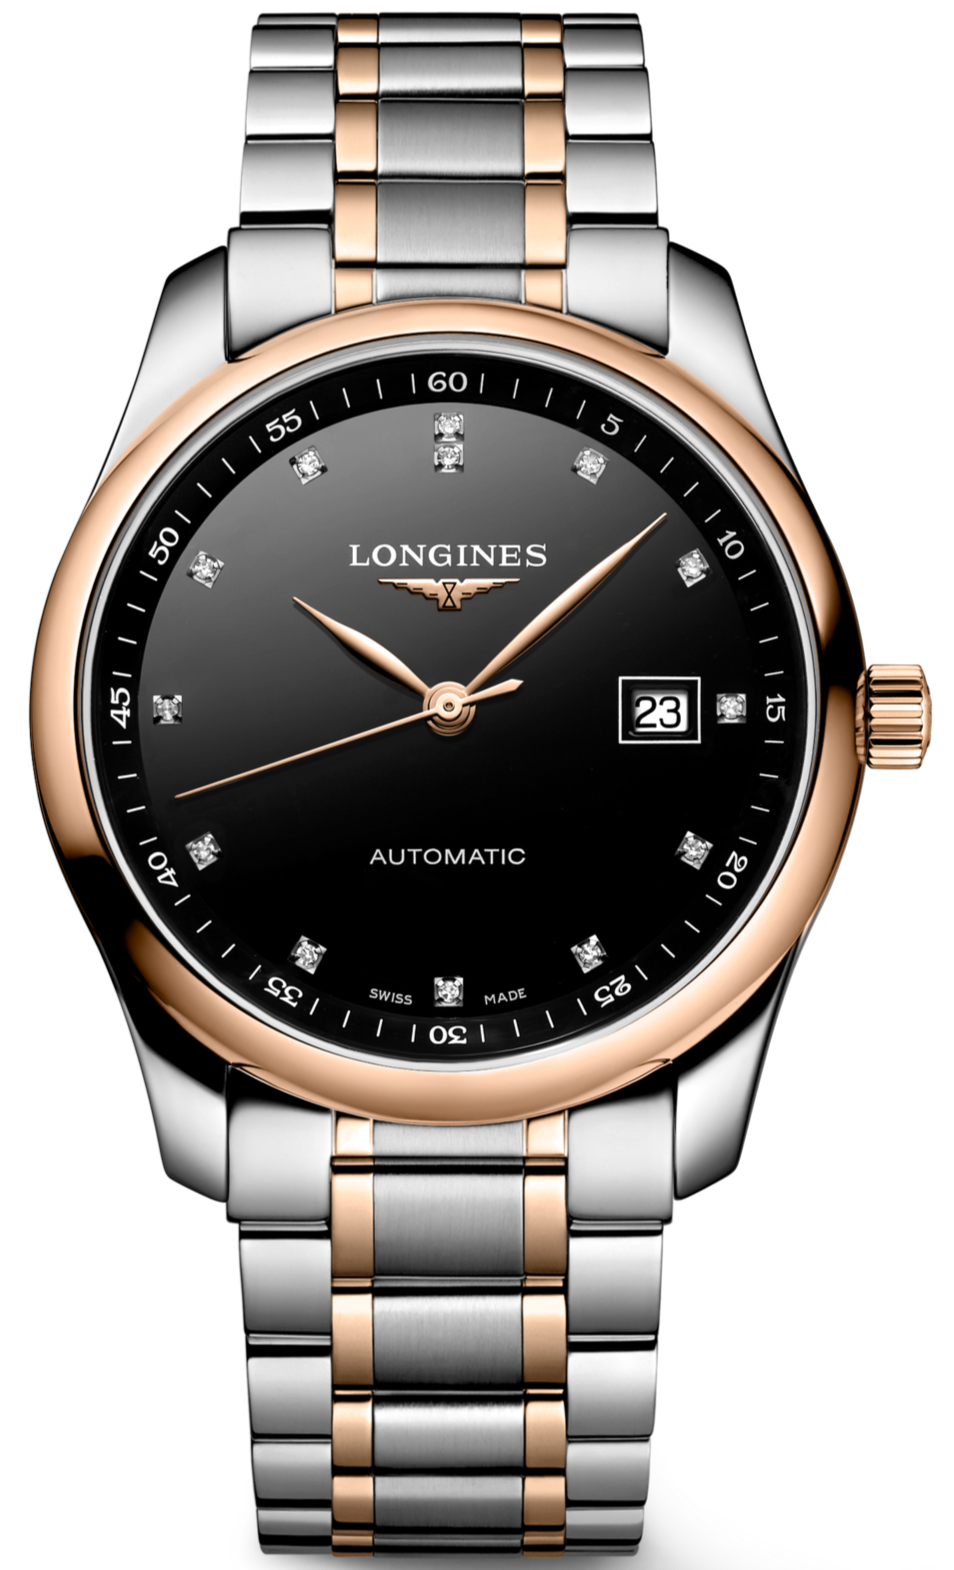 Longines Master Collection Automatic Diamonds Black Dial Two Tone Steel Strap Watch for Men - L2.793.5.57.7